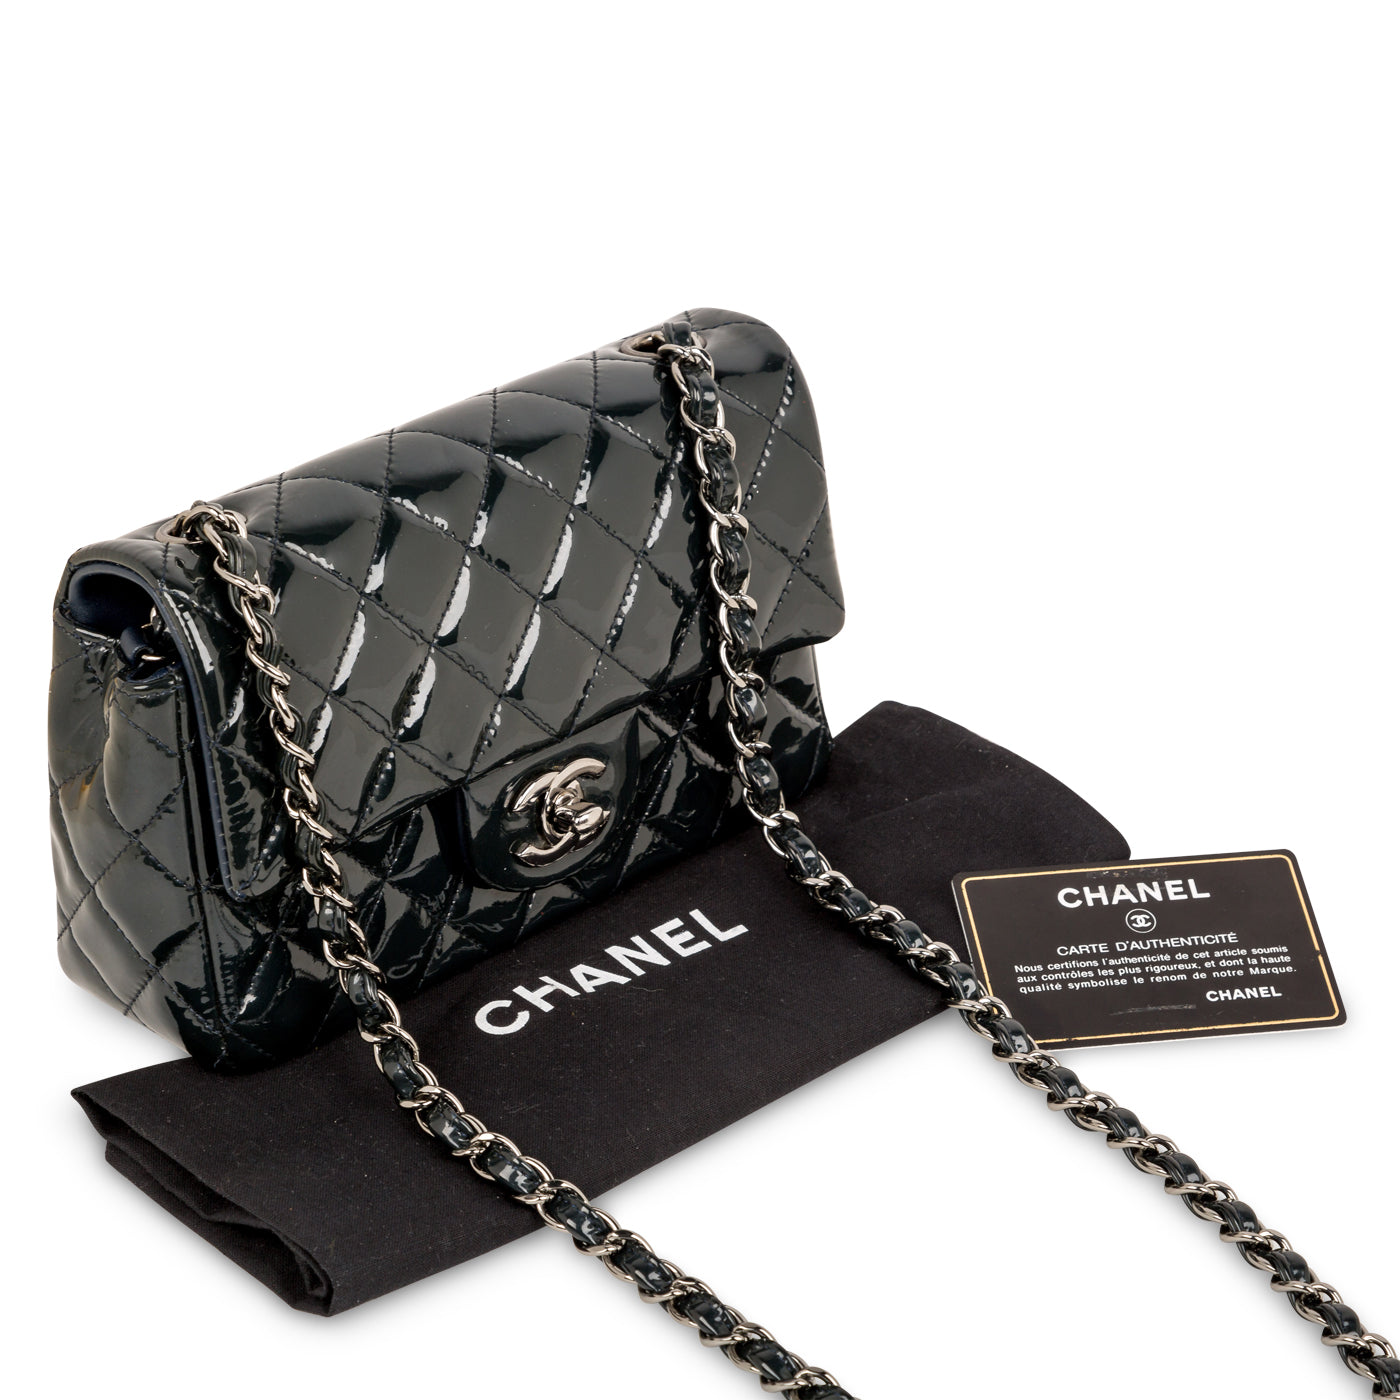 Chanel Iridescent Calfskin Quilted Medium Double Flap Charcoal